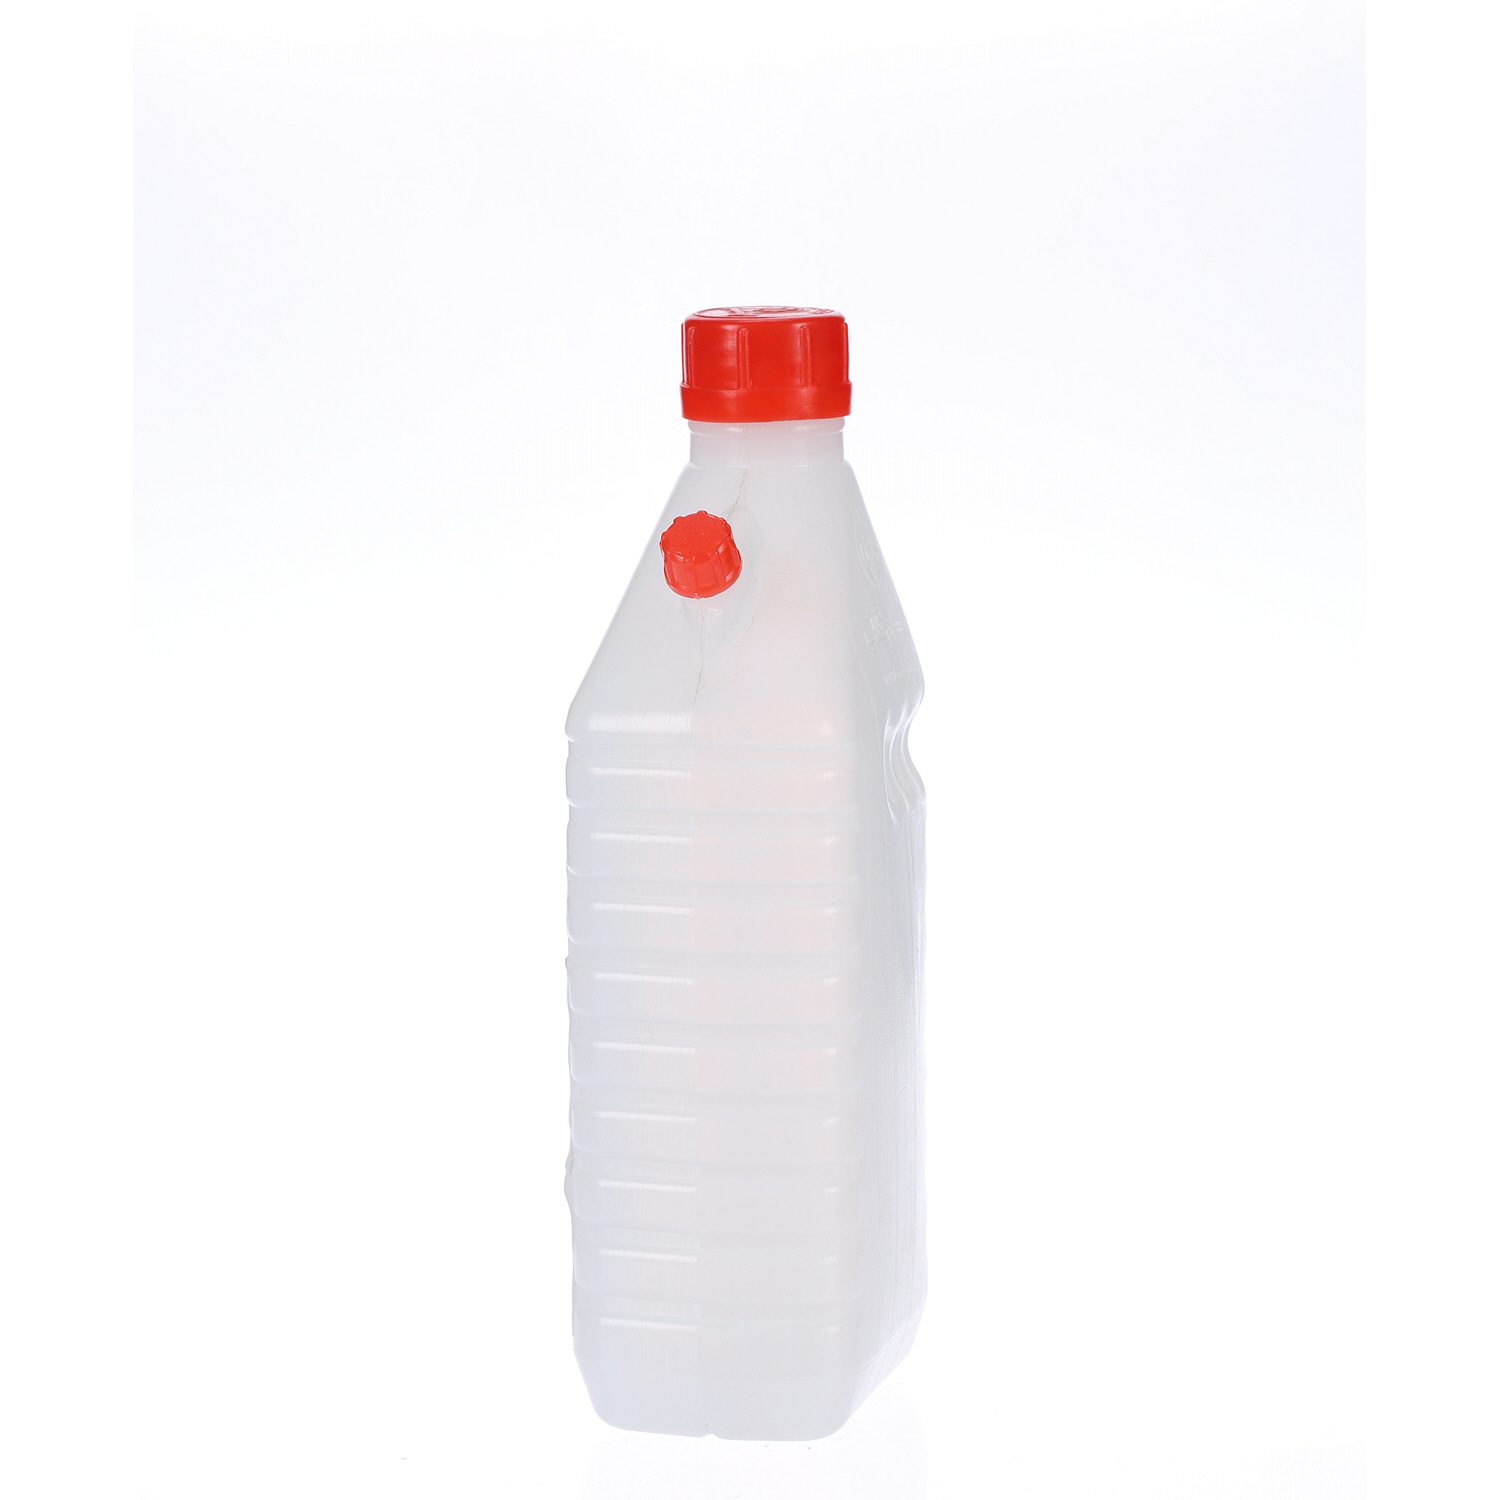 Rabee Rose Water 1Ltr